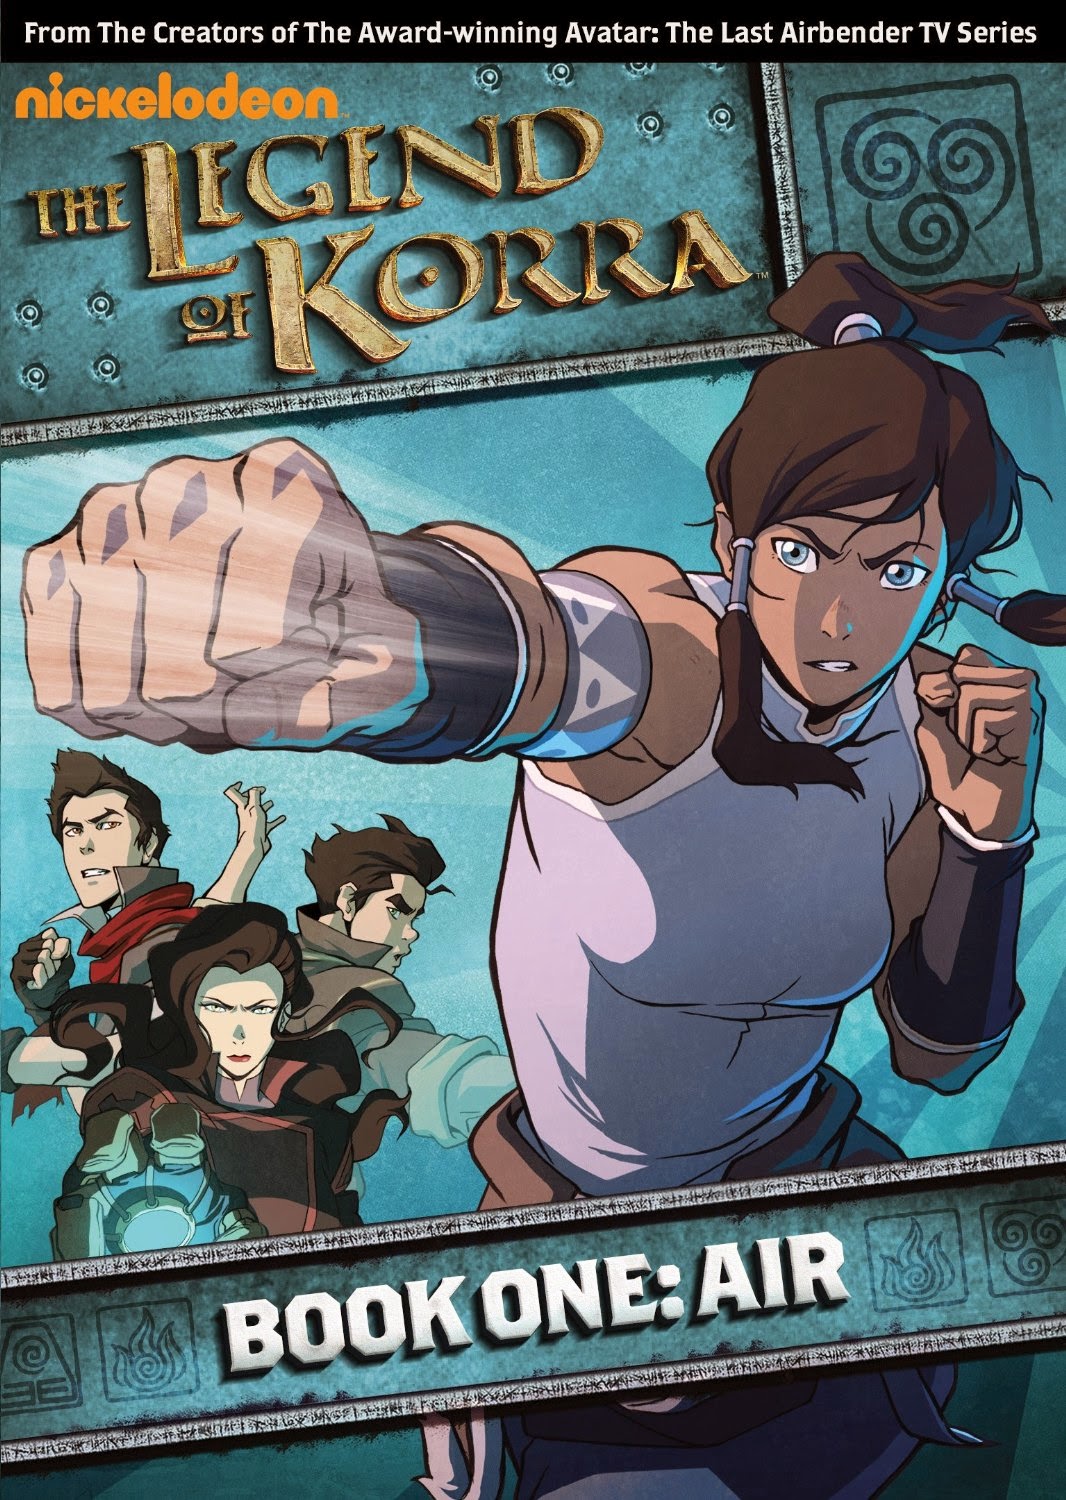 J And J Productions Legend Of Korra Book 1 Review